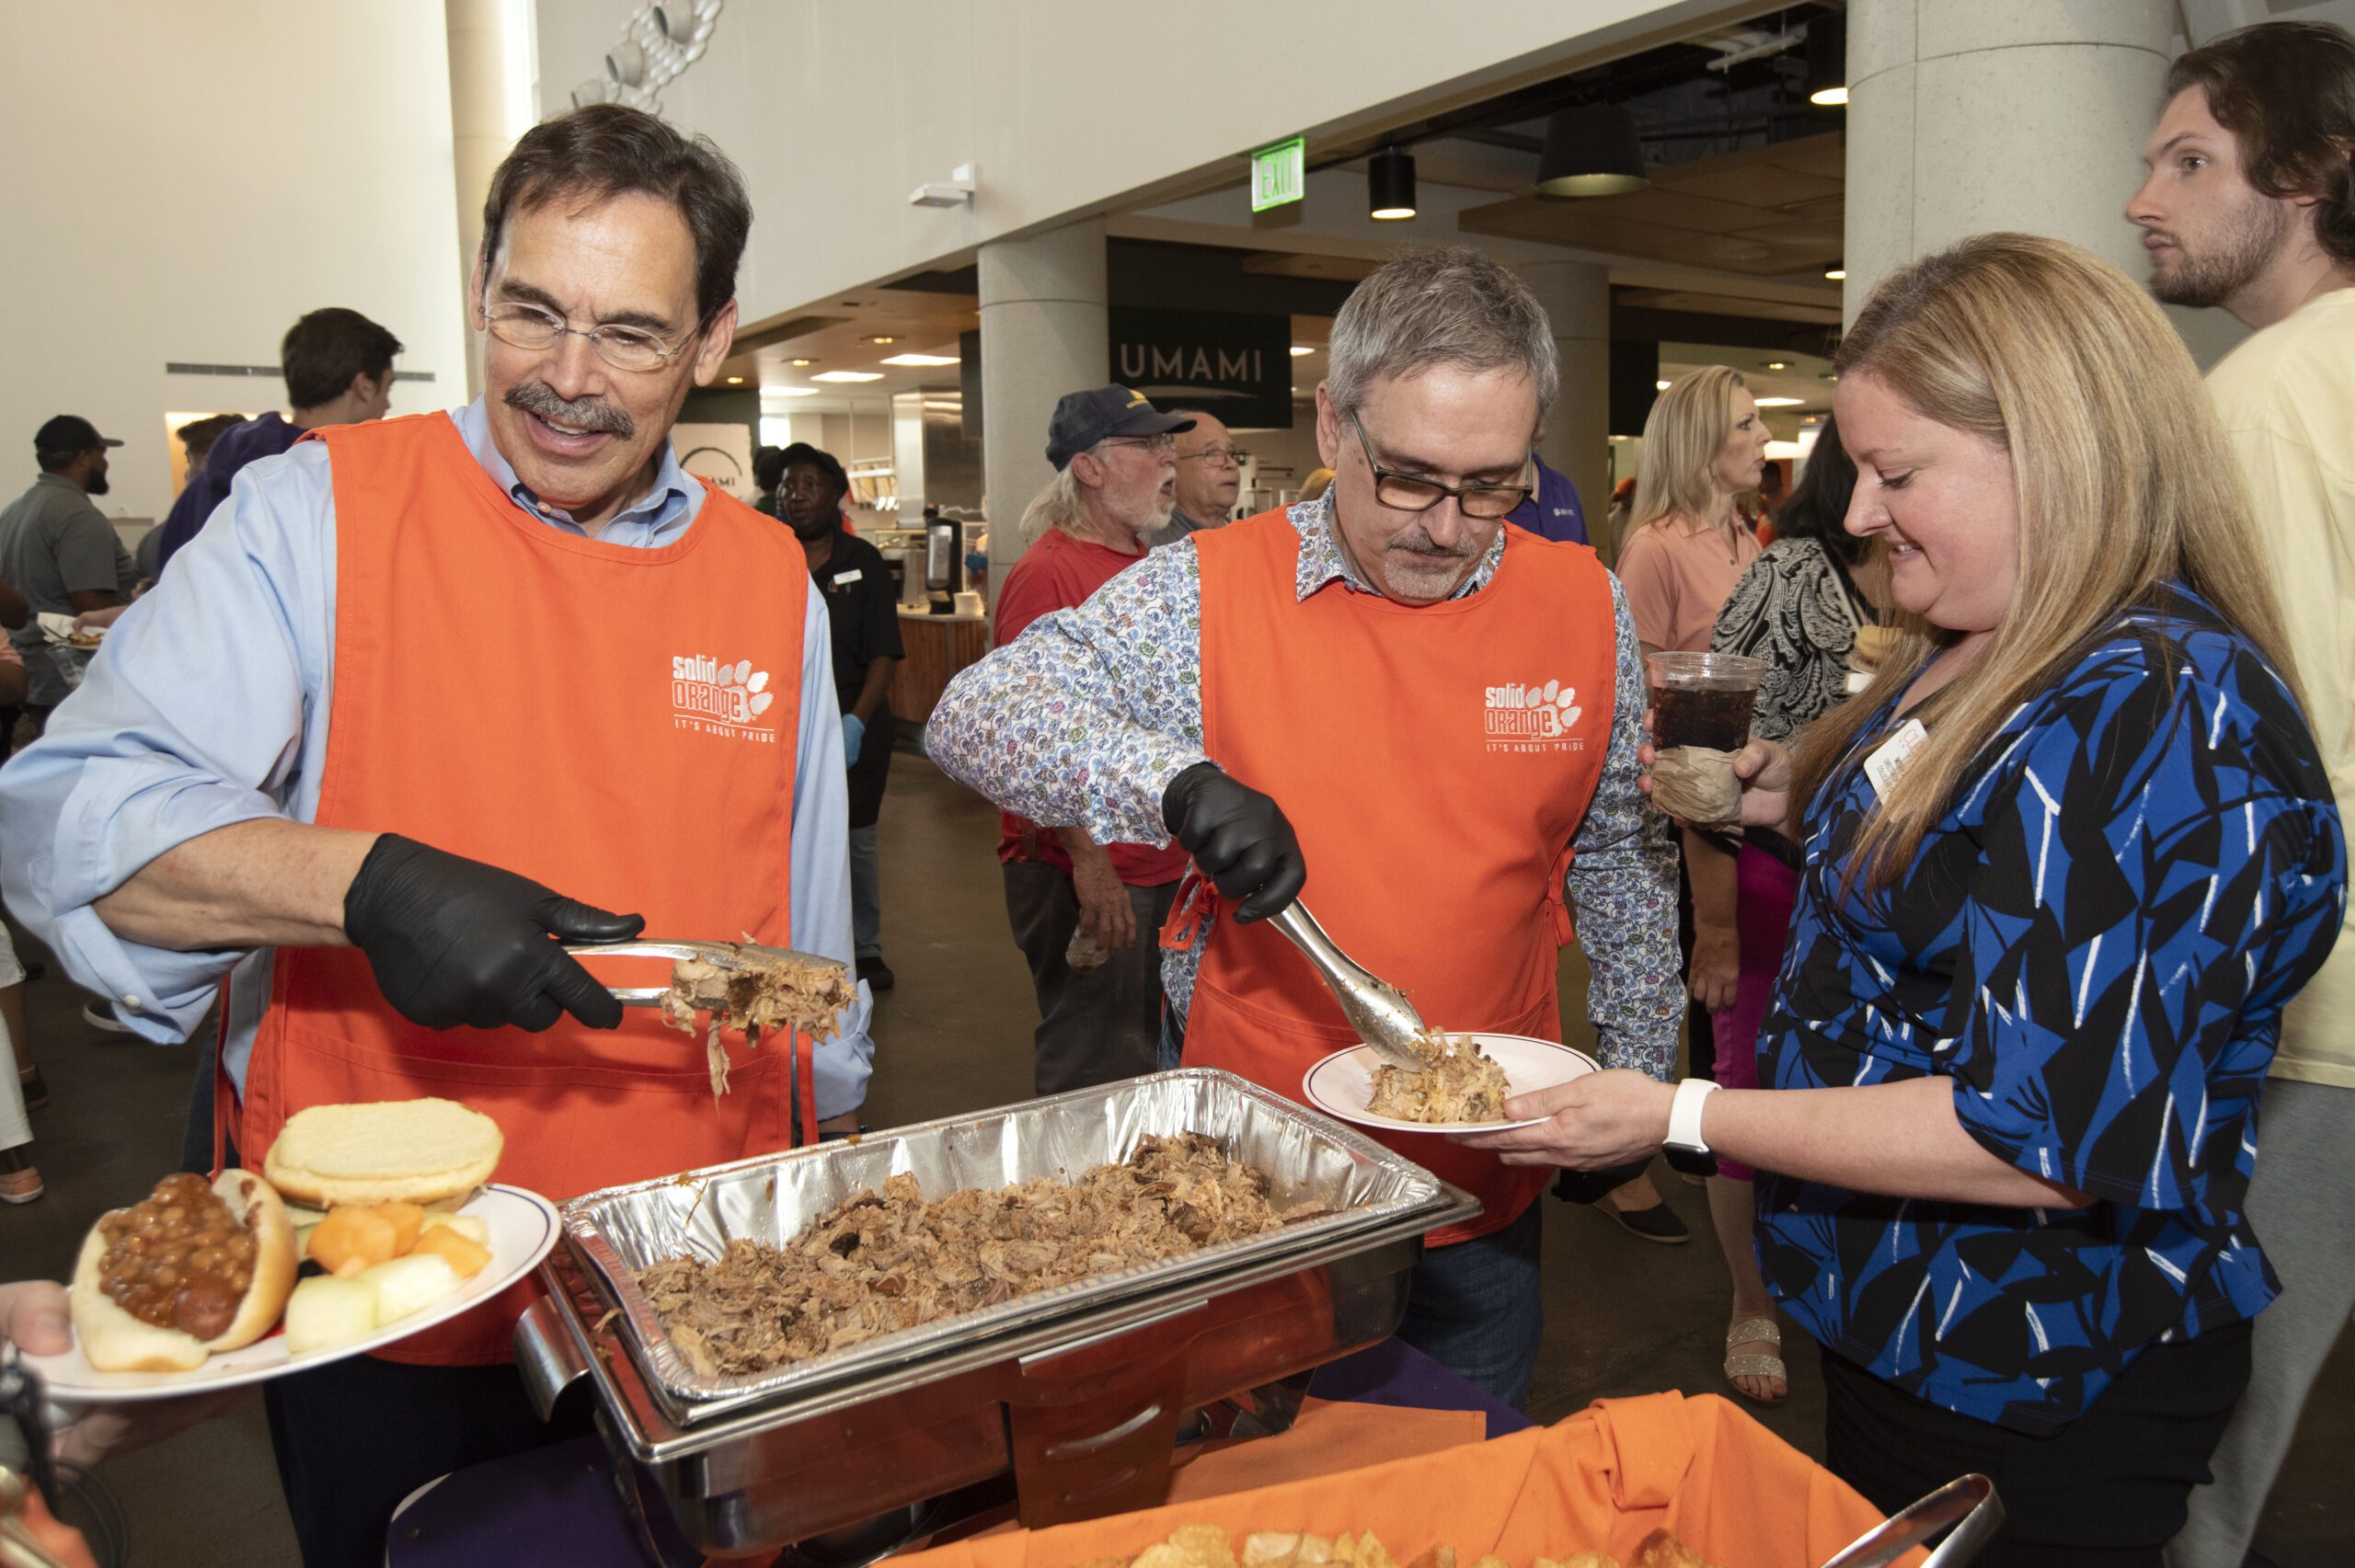 Two men wearing glasses, button up shirts, and Solid Orange aprons serve food to a woman in a blue shirt.